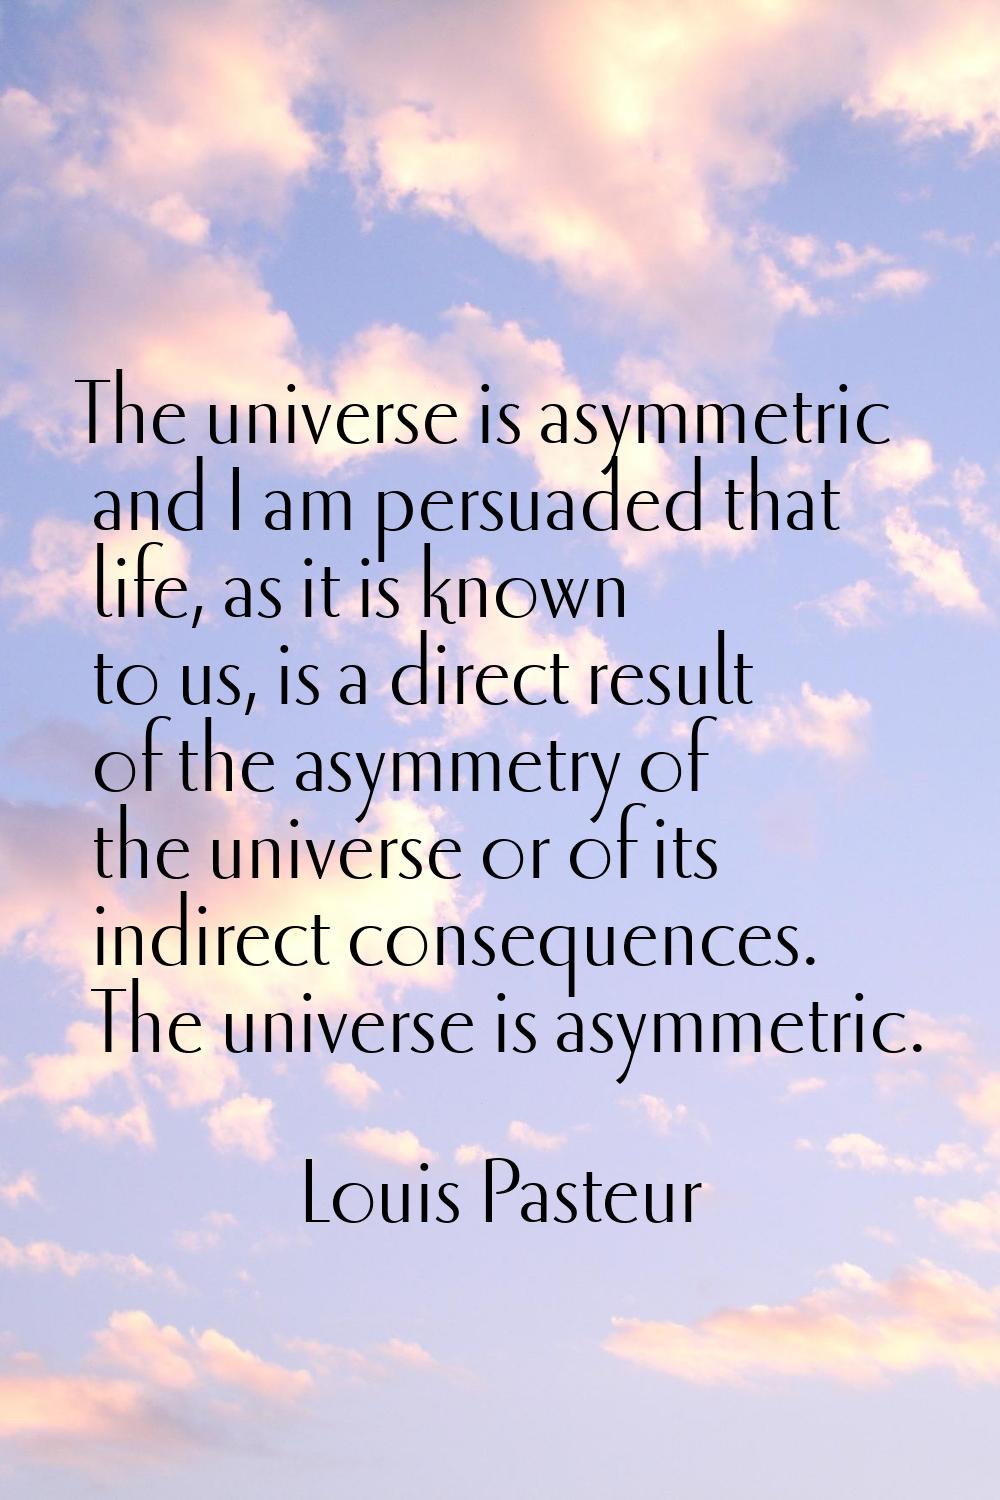 The universe is asymmetric and I am persuaded that life, as it is known to us, is a direct result o